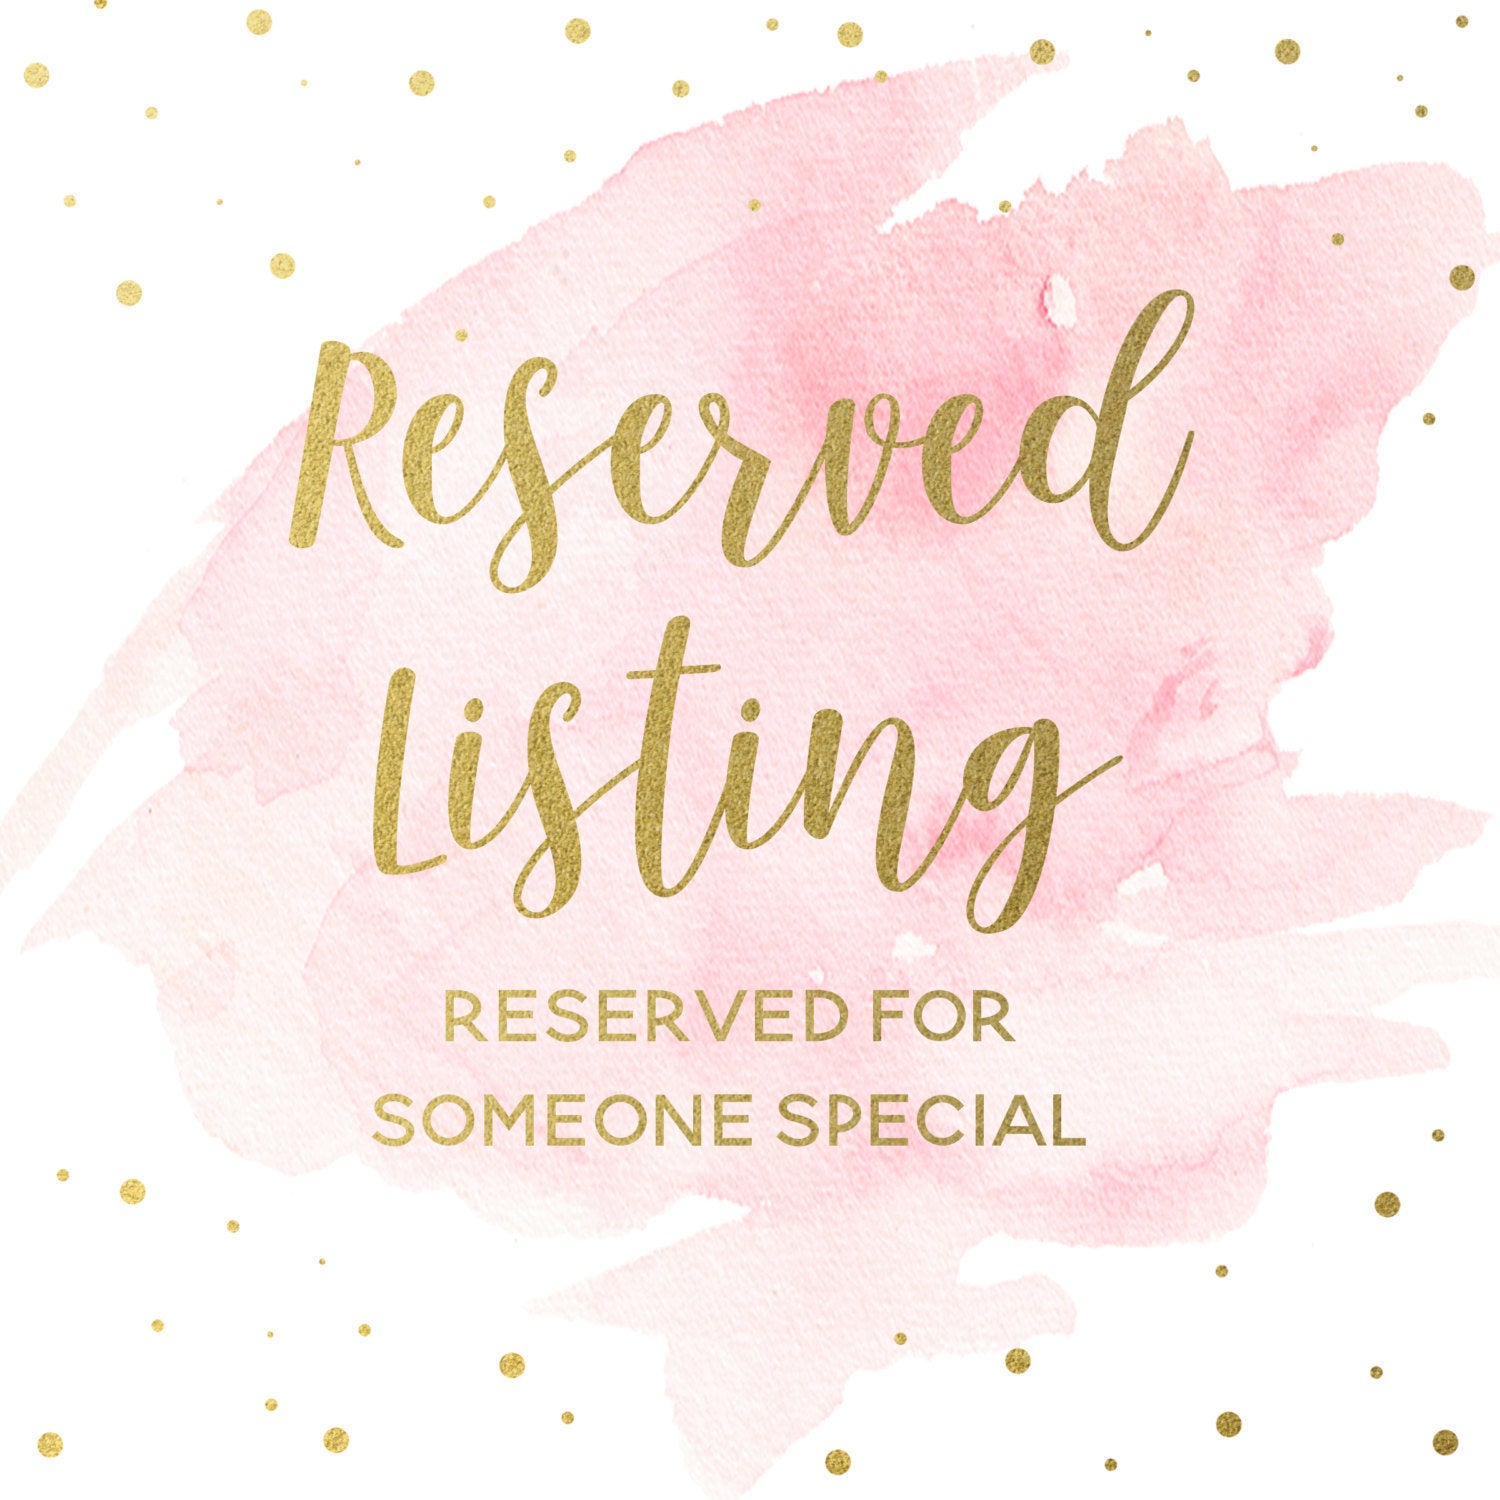 Reserved Listing - Mandy T